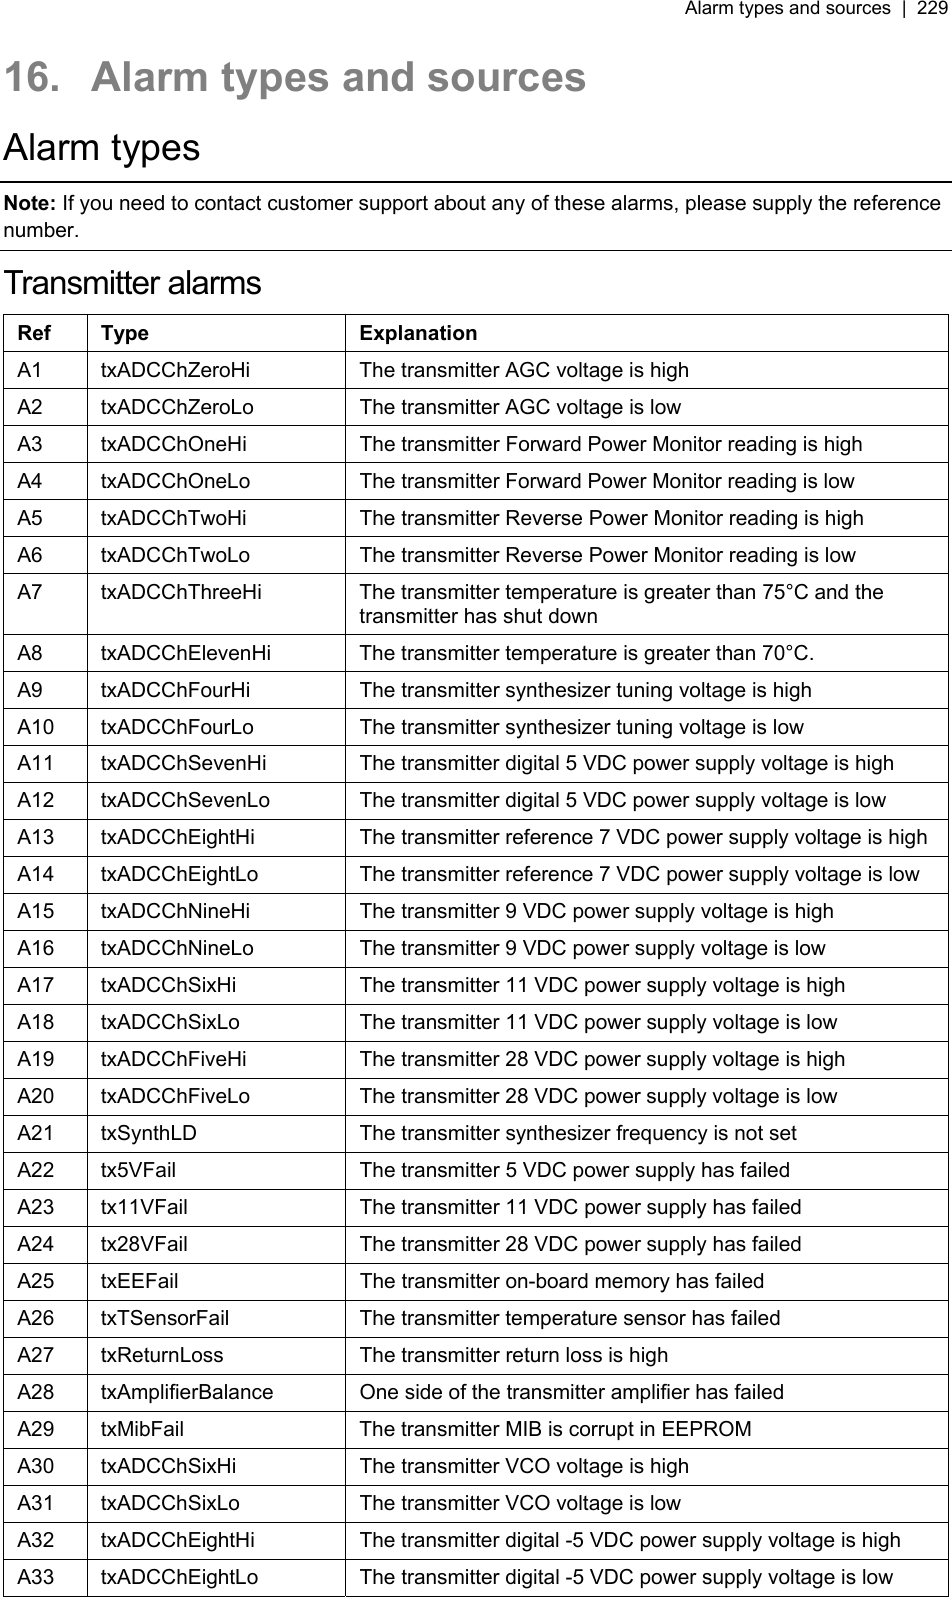 Alarm types and sources  |  229   16.  Alarm types and sources Alarm types Note: If you need to contact customer support about any of these alarms, please supply the reference number. Transmitter alarms Ref Type  Explanation A1  txADCChZeroHi  The transmitter AGC voltage is high A2  txADCChZeroLo  The transmitter AGC voltage is low A3  txADCChOneHi  The transmitter Forward Power Monitor reading is high A4  txADCChOneLo  The transmitter Forward Power Monitor reading is low A5  txADCChTwoHi  The transmitter Reverse Power Monitor reading is high A6  txADCChTwoLo  The transmitter Reverse Power Monitor reading is low A7  txADCChThreeHi  The transmitter temperature is greater than 75°C and the transmitter has shut down A8  txADCChElevenHi  The transmitter temperature is greater than 70°C. A9  txADCChFourHi  The transmitter synthesizer tuning voltage is high A10  txADCChFourLo  The transmitter synthesizer tuning voltage is low A11  txADCChSevenHi  The transmitter digital 5 VDC power supply voltage is high A12  txADCChSevenLo  The transmitter digital 5 VDC power supply voltage is low A13  txADCChEightHi  The transmitter reference 7 VDC power supply voltage is high A14  txADCChEightLo  The transmitter reference 7 VDC power supply voltage is low A15  txADCChNineHi  The transmitter 9 VDC power supply voltage is high A16  txADCChNineLo  The transmitter 9 VDC power supply voltage is low A17  txADCChSixHi  The transmitter 11 VDC power supply voltage is high A18  txADCChSixLo  The transmitter 11 VDC power supply voltage is low A19  txADCChFiveHi  The transmitter 28 VDC power supply voltage is high A20  txADCChFiveLo  The transmitter 28 VDC power supply voltage is low A21  txSynthLD  The transmitter synthesizer frequency is not set A22  tx5VFail  The transmitter 5 VDC power supply has failed A23  tx11VFail  The transmitter 11 VDC power supply has failed A24  tx28VFail  The transmitter 28 VDC power supply has failed A25  txEEFail  The transmitter on-board memory has failed A26  txTSensorFail  The transmitter temperature sensor has failed A27  txReturnLoss  The transmitter return loss is high A28  txAmplifierBalance  One side of the transmitter amplifier has failed A29  txMibFail  The transmitter MIB is corrupt in EEPROM A30  txADCChSixHi  The transmitter VCO voltage is high A31  txADCChSixLo  The transmitter VCO voltage is low A32  txADCChEightHi  The transmitter digital -5 VDC power supply voltage is high A33  txADCChEightLo  The transmitter digital -5 VDC power supply voltage is low  